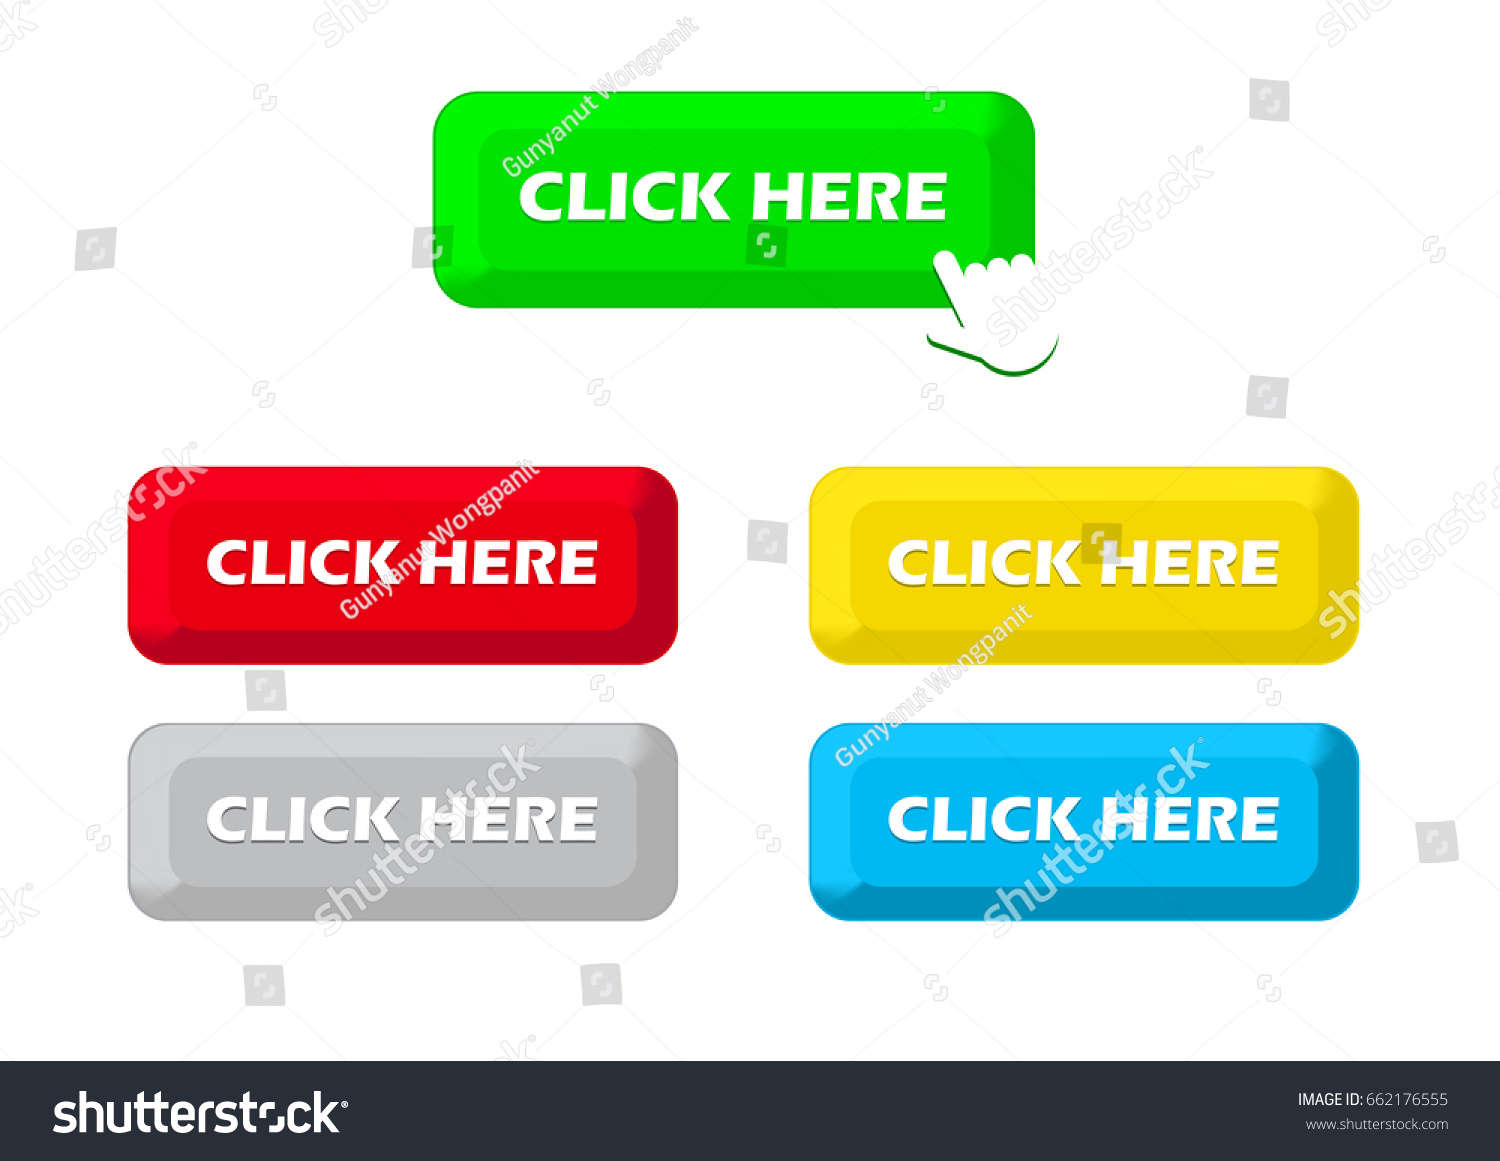 click here buttons set vector #662176555